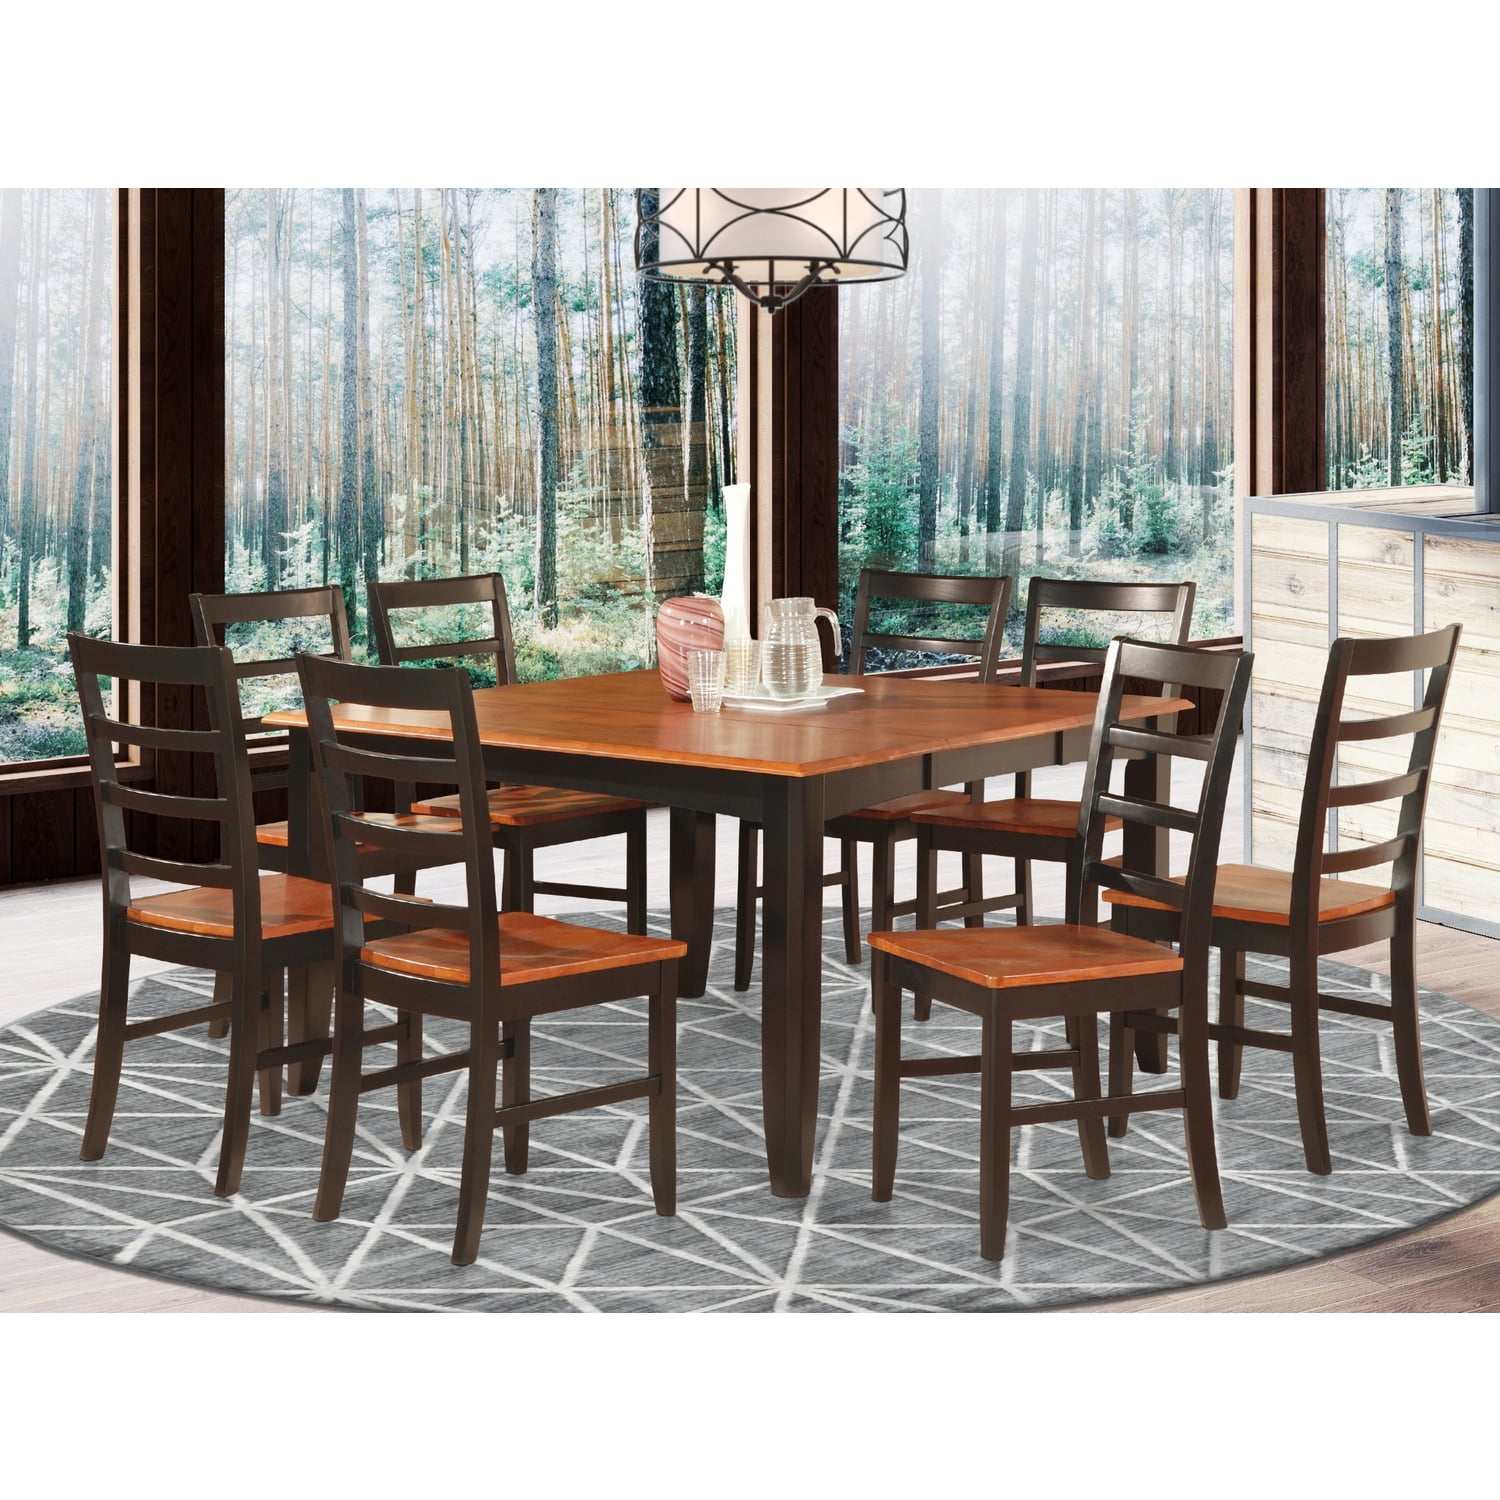 Dining Room Set Square Table, How Big Is A Square Dining Table That Seats 8